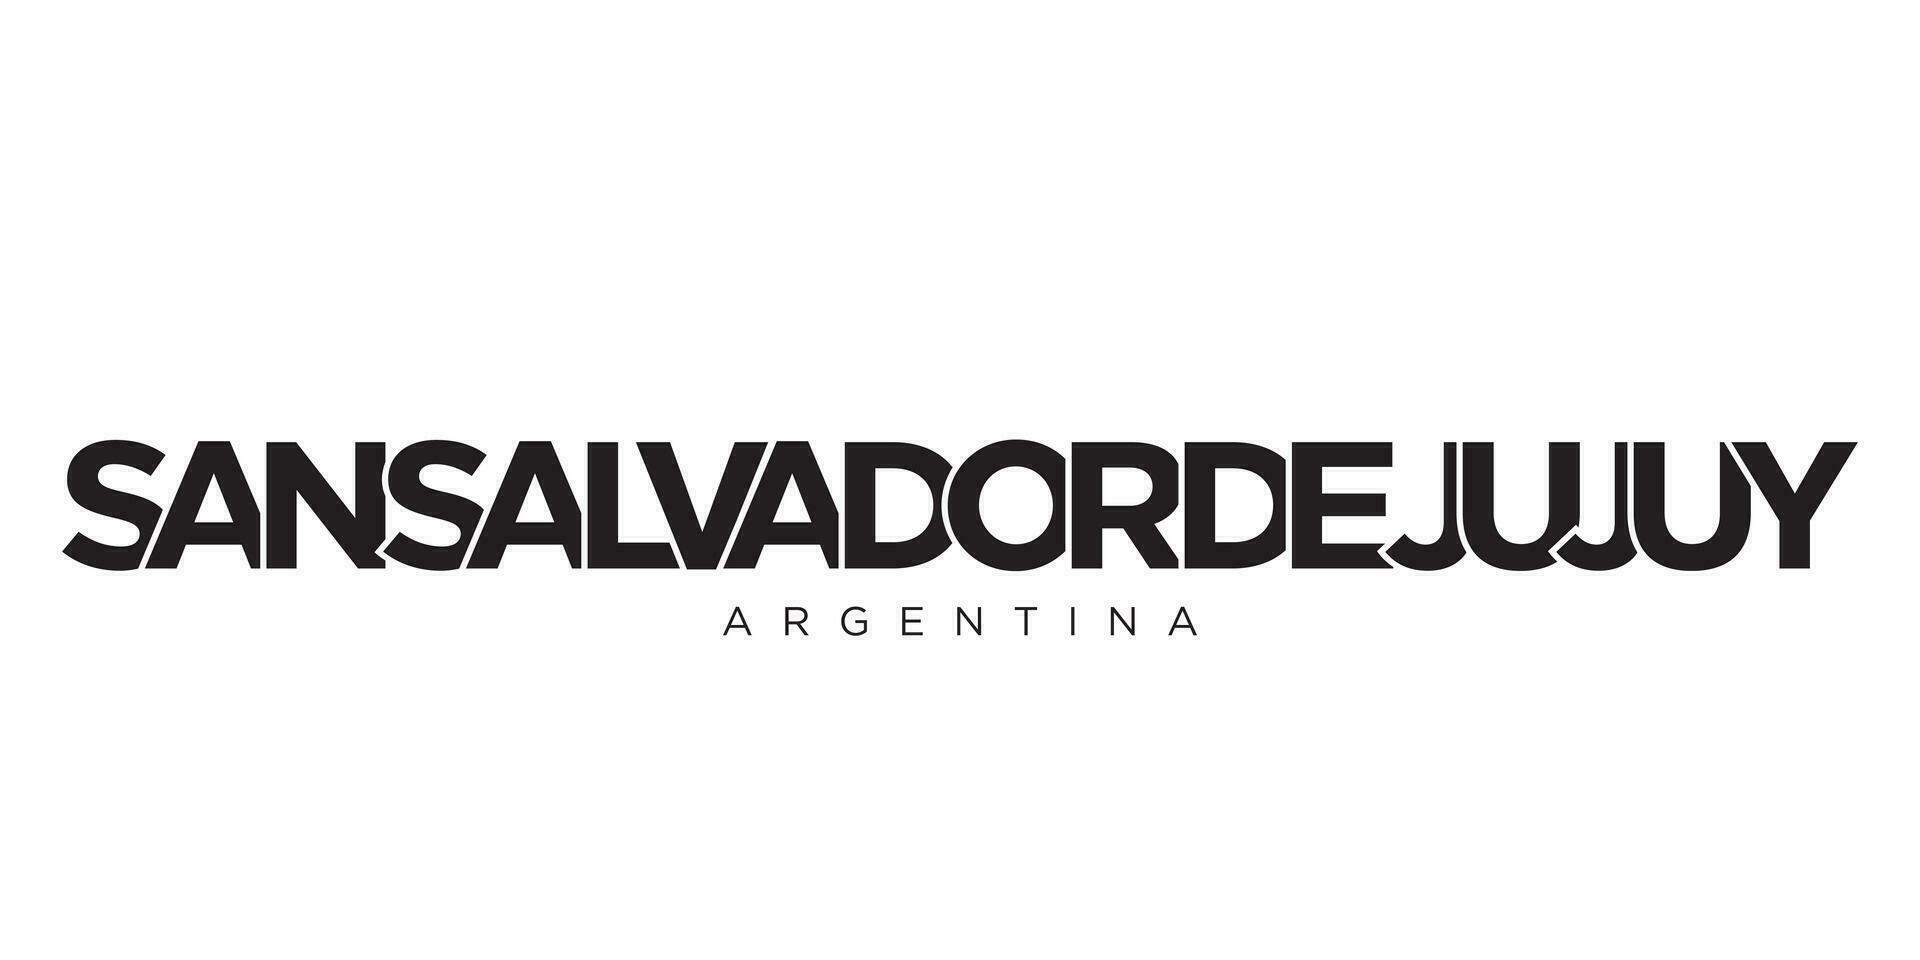 San Salvador de Jujuy in the Argentina emblem. The design features a geometric style, vector illustration with bold typography in a modern font. The graphic slogan lettering.